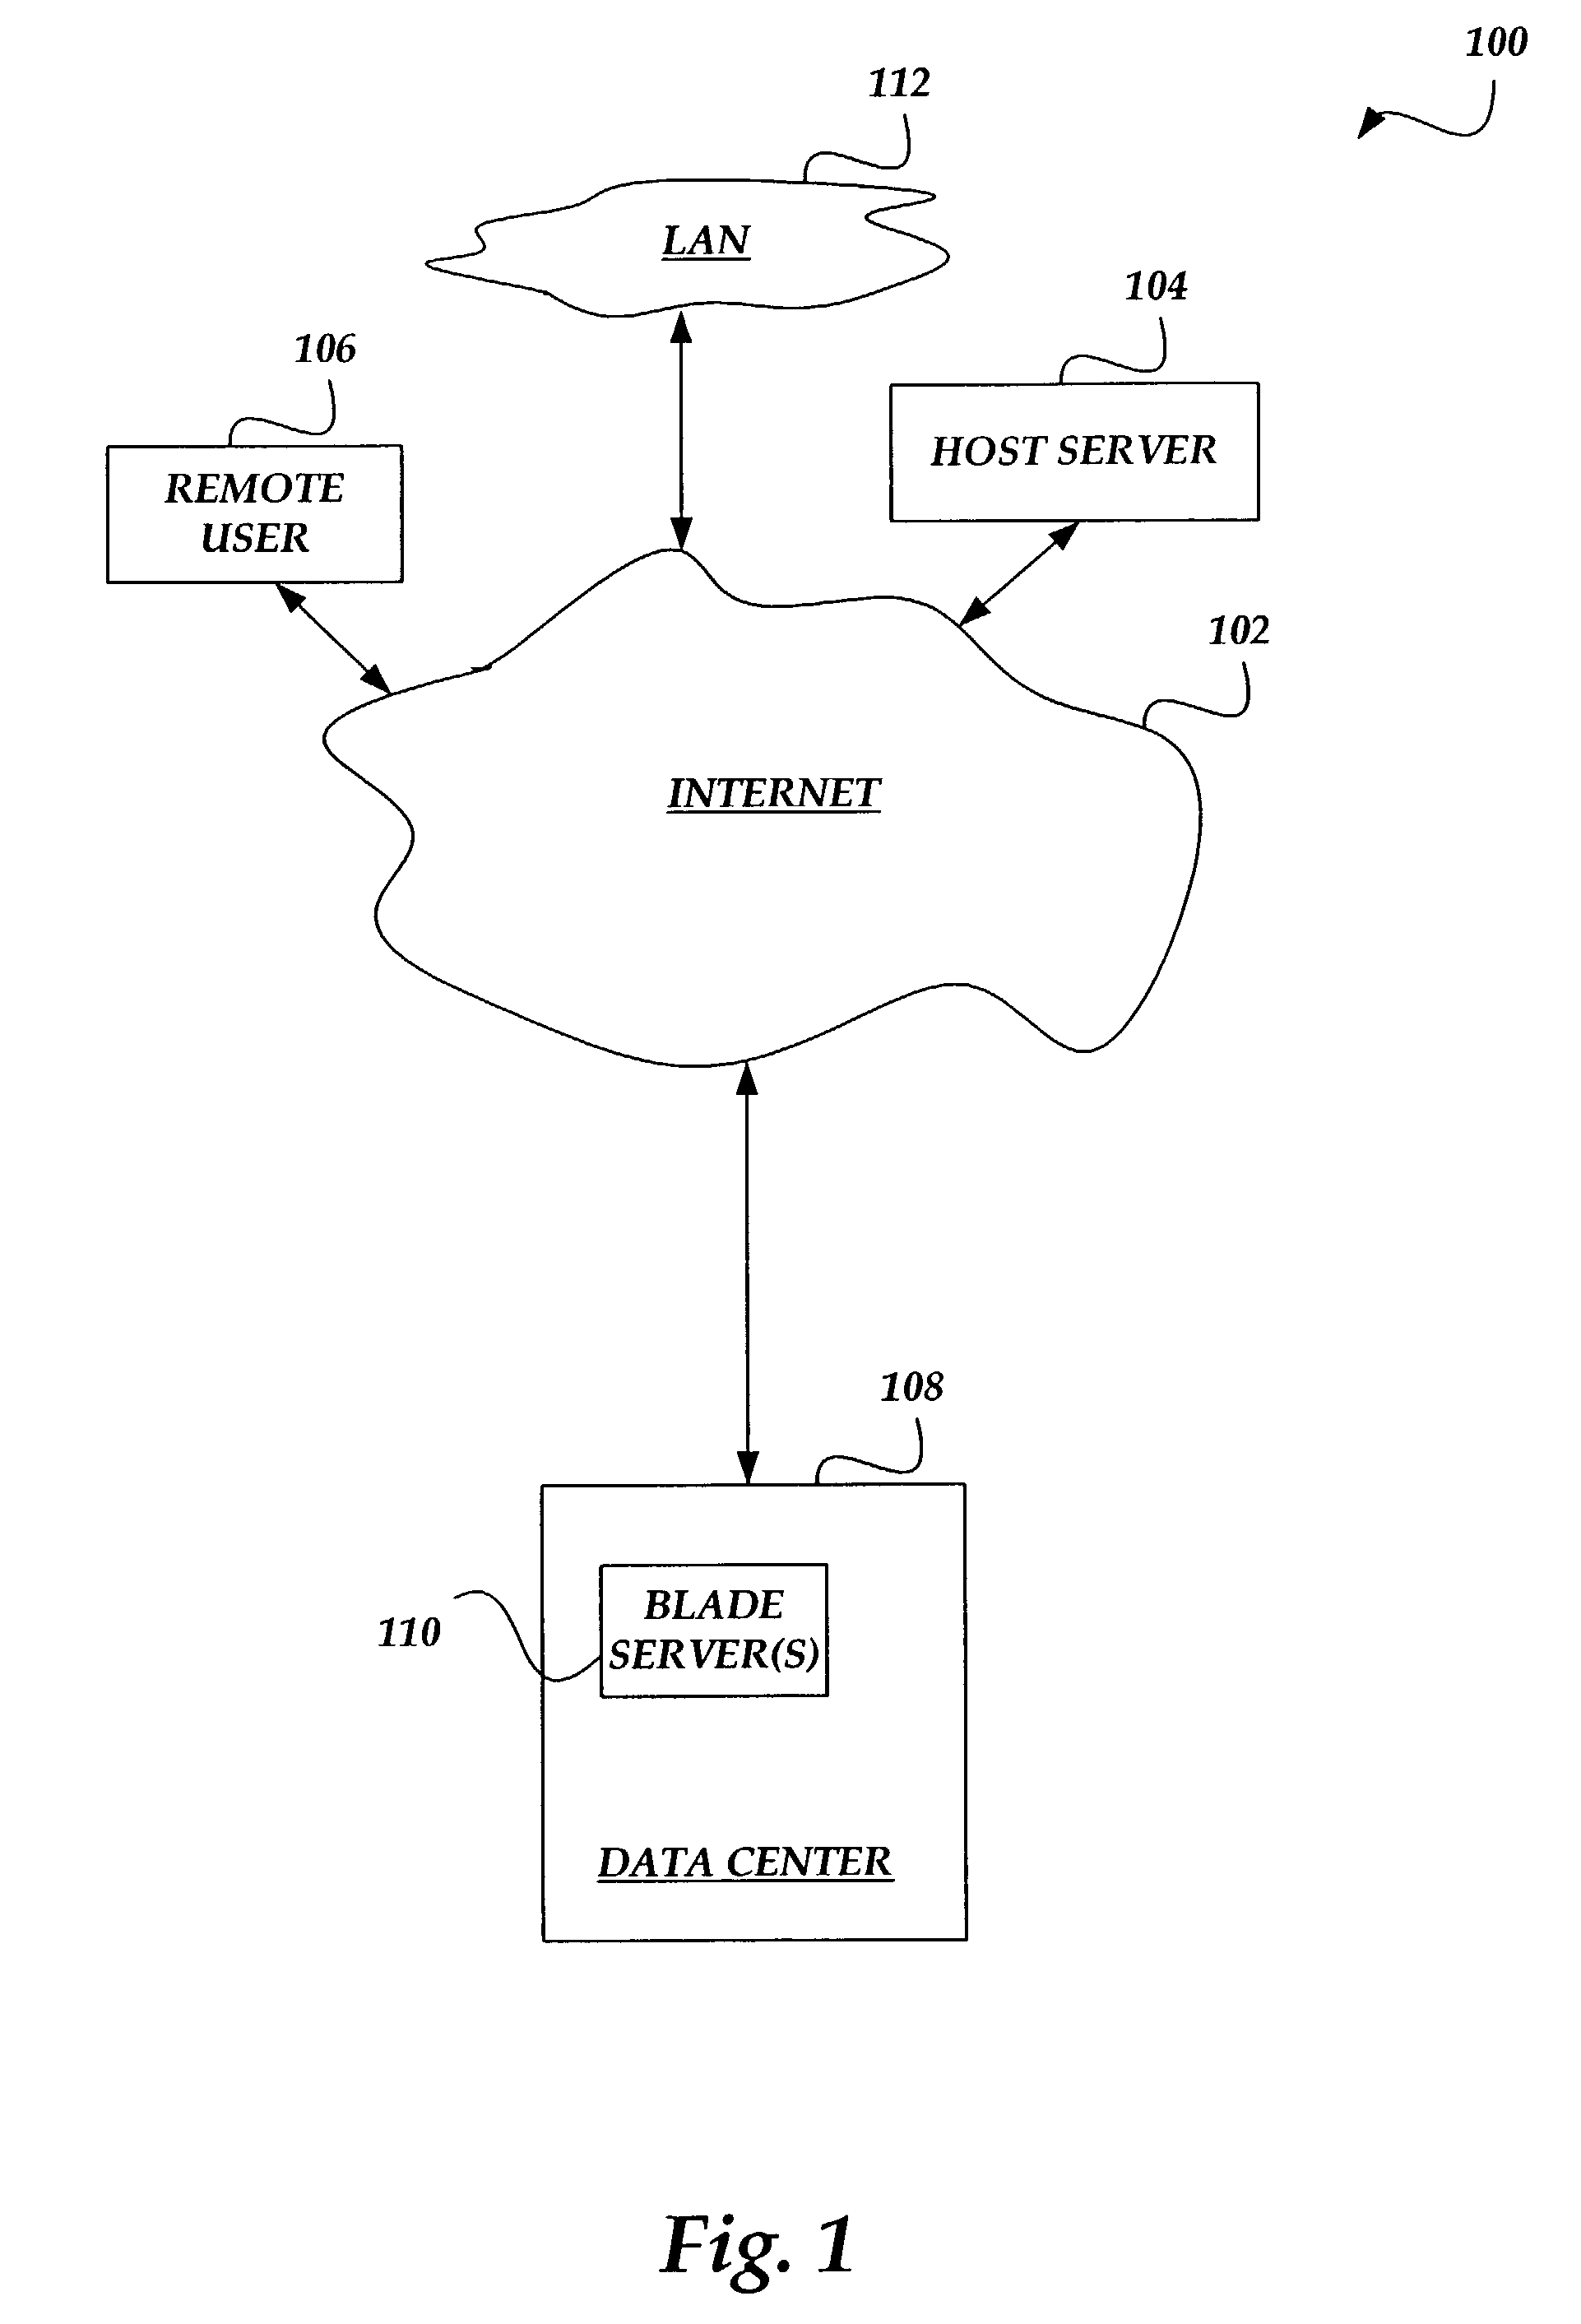 Method and system for hard disk emulation and cryptographic acceleration on a blade server